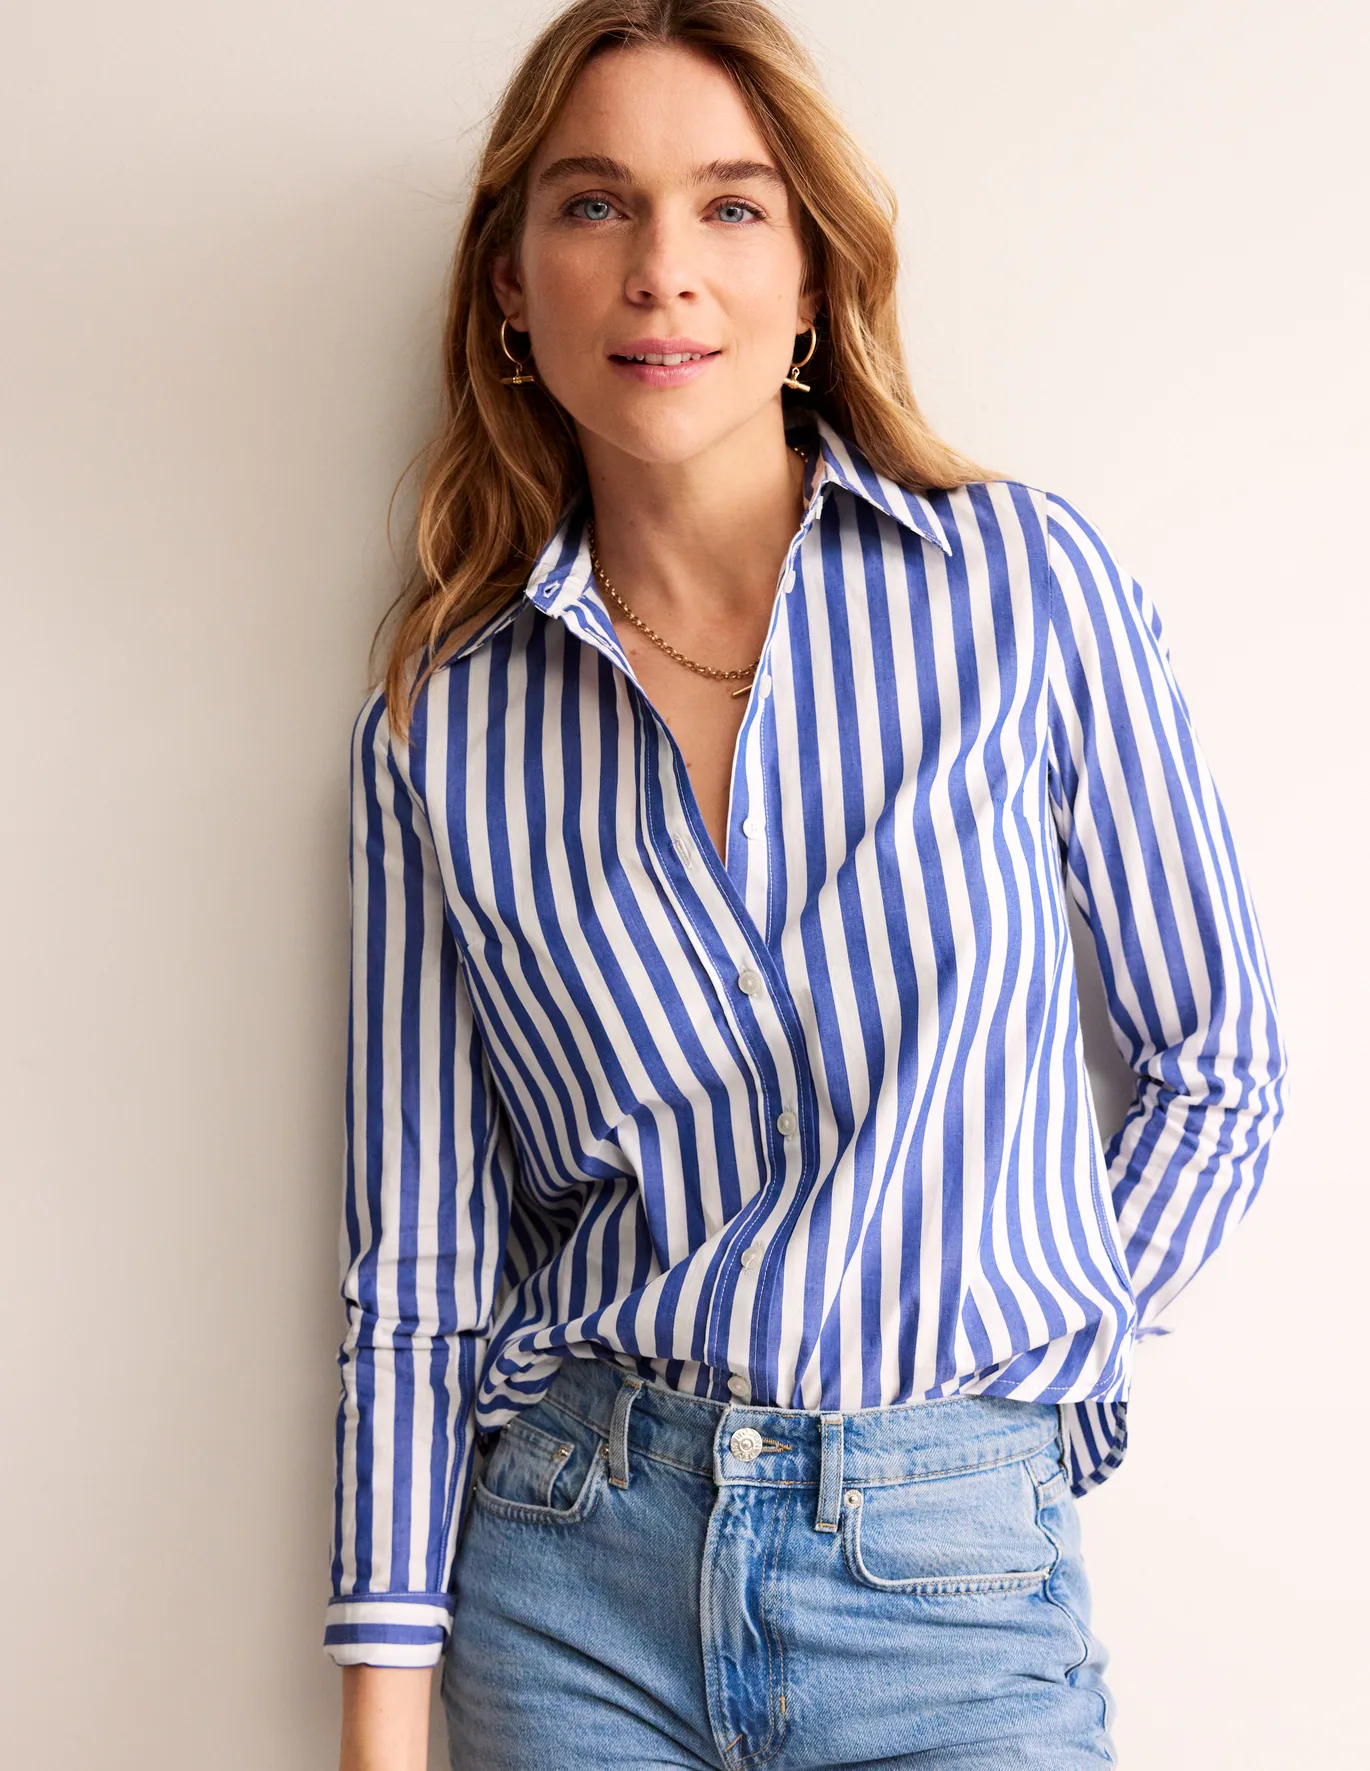 The Find: A Classic Shirt for Spring